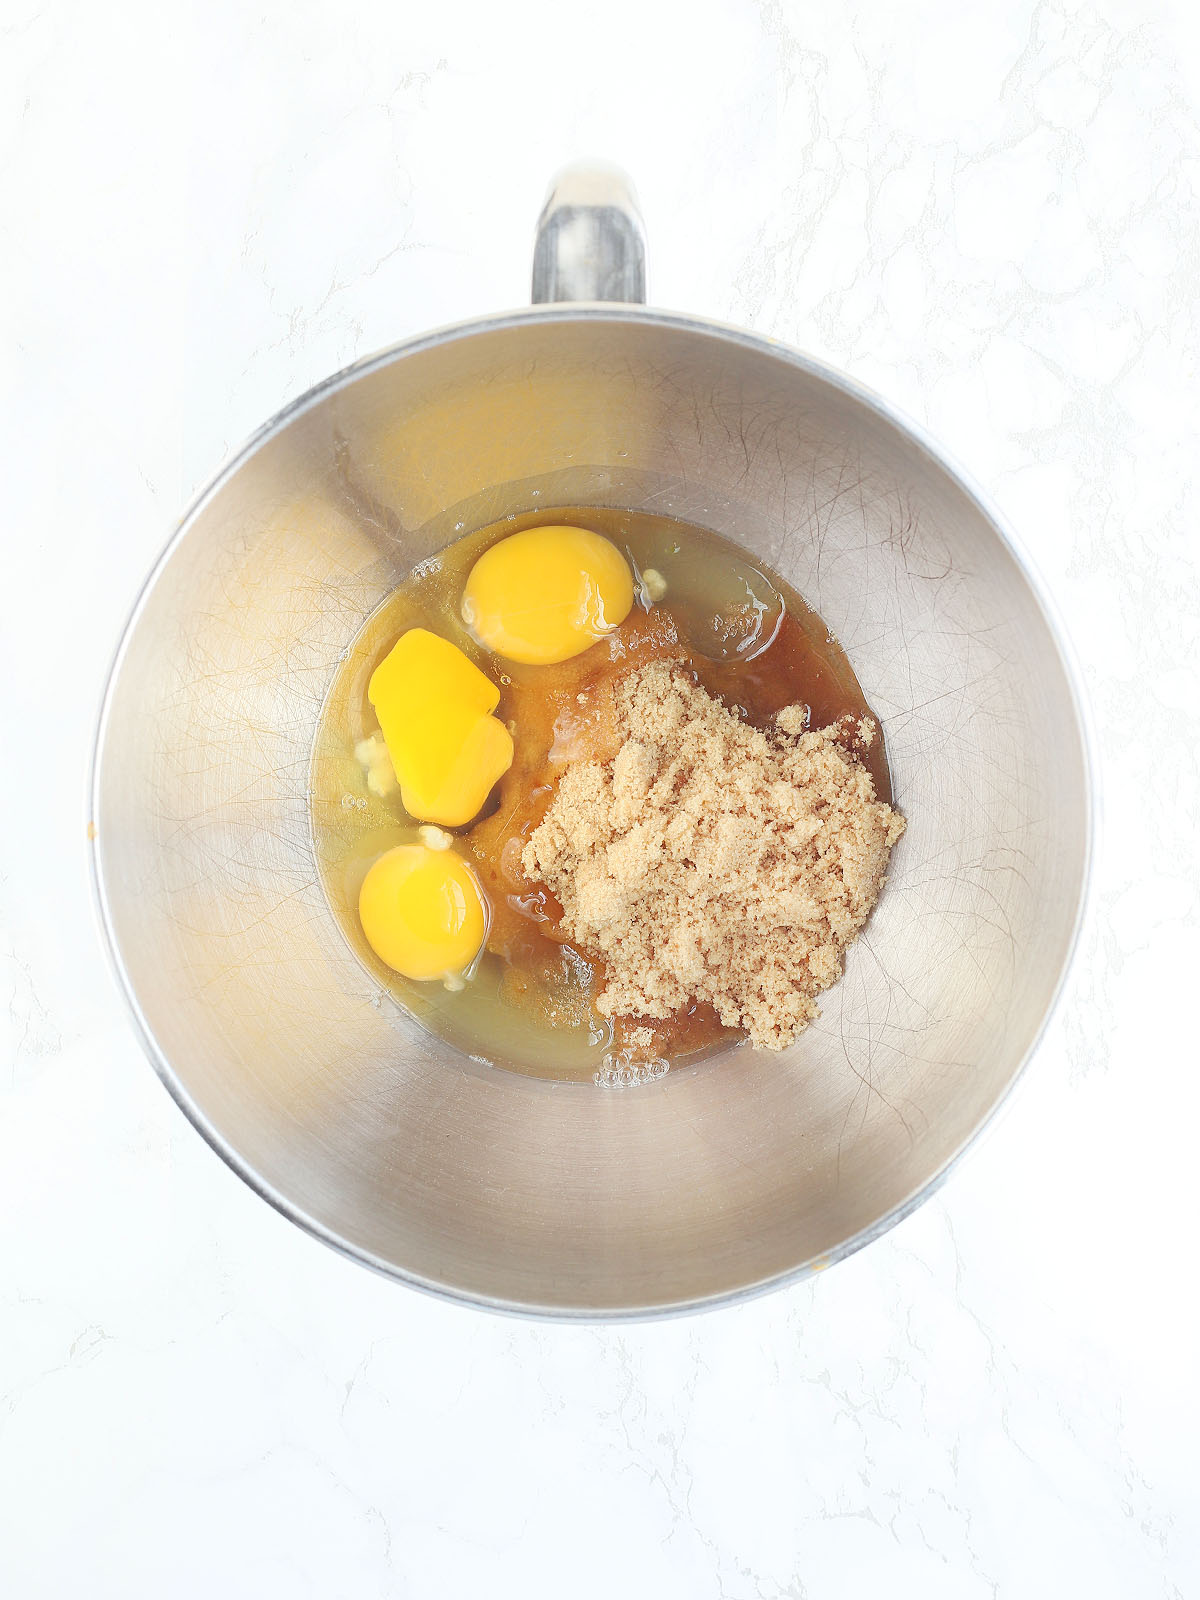 eggs and sugar before they have been whisked together in a mixing bowl